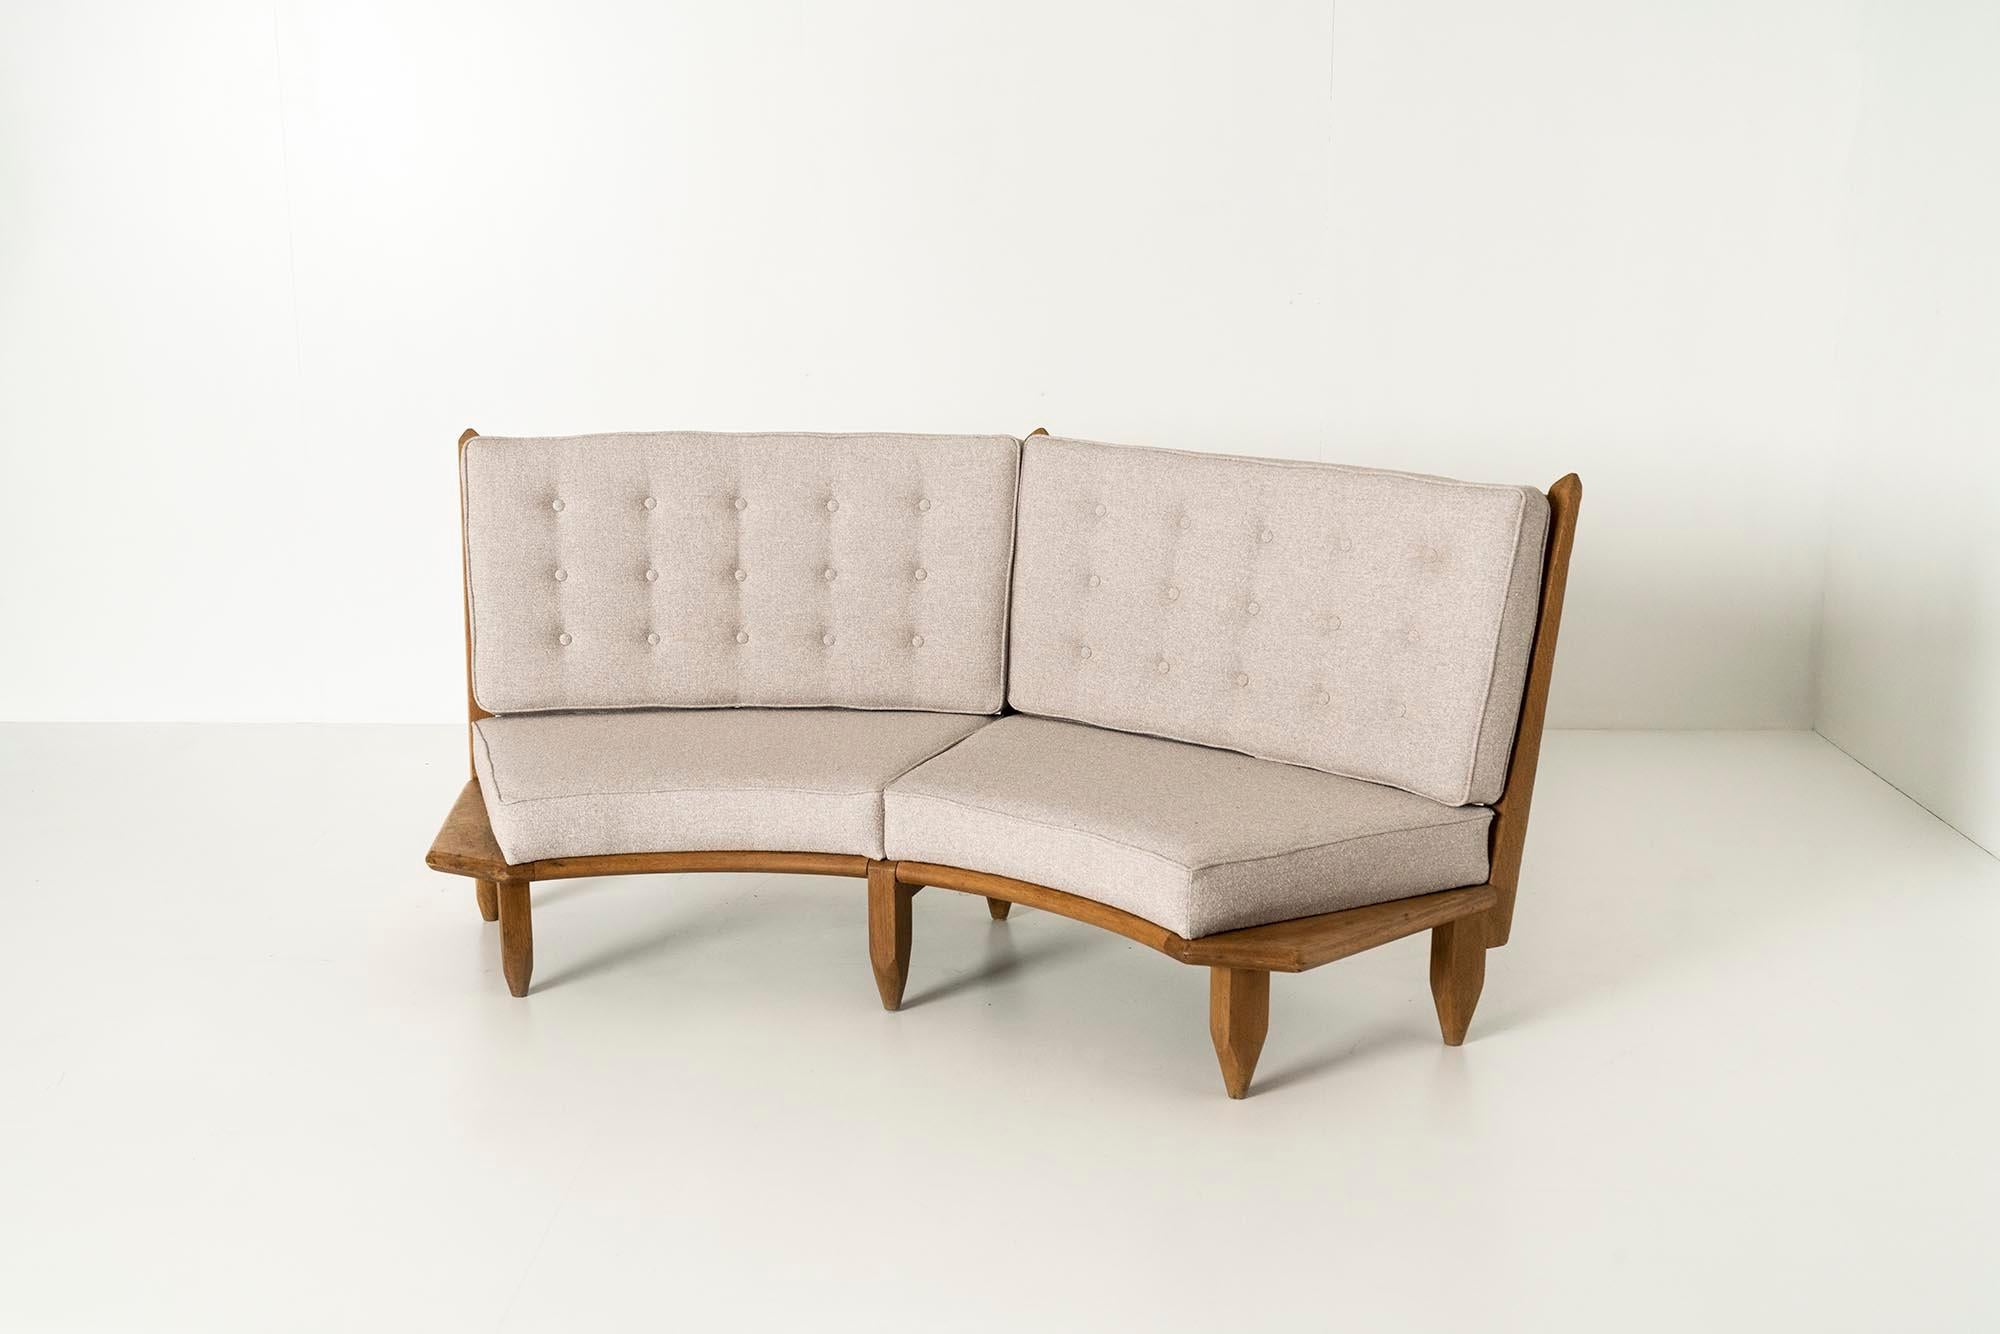 French Provincial Oak Sofa by Guillerme et Chambron, France 1960s For Sale